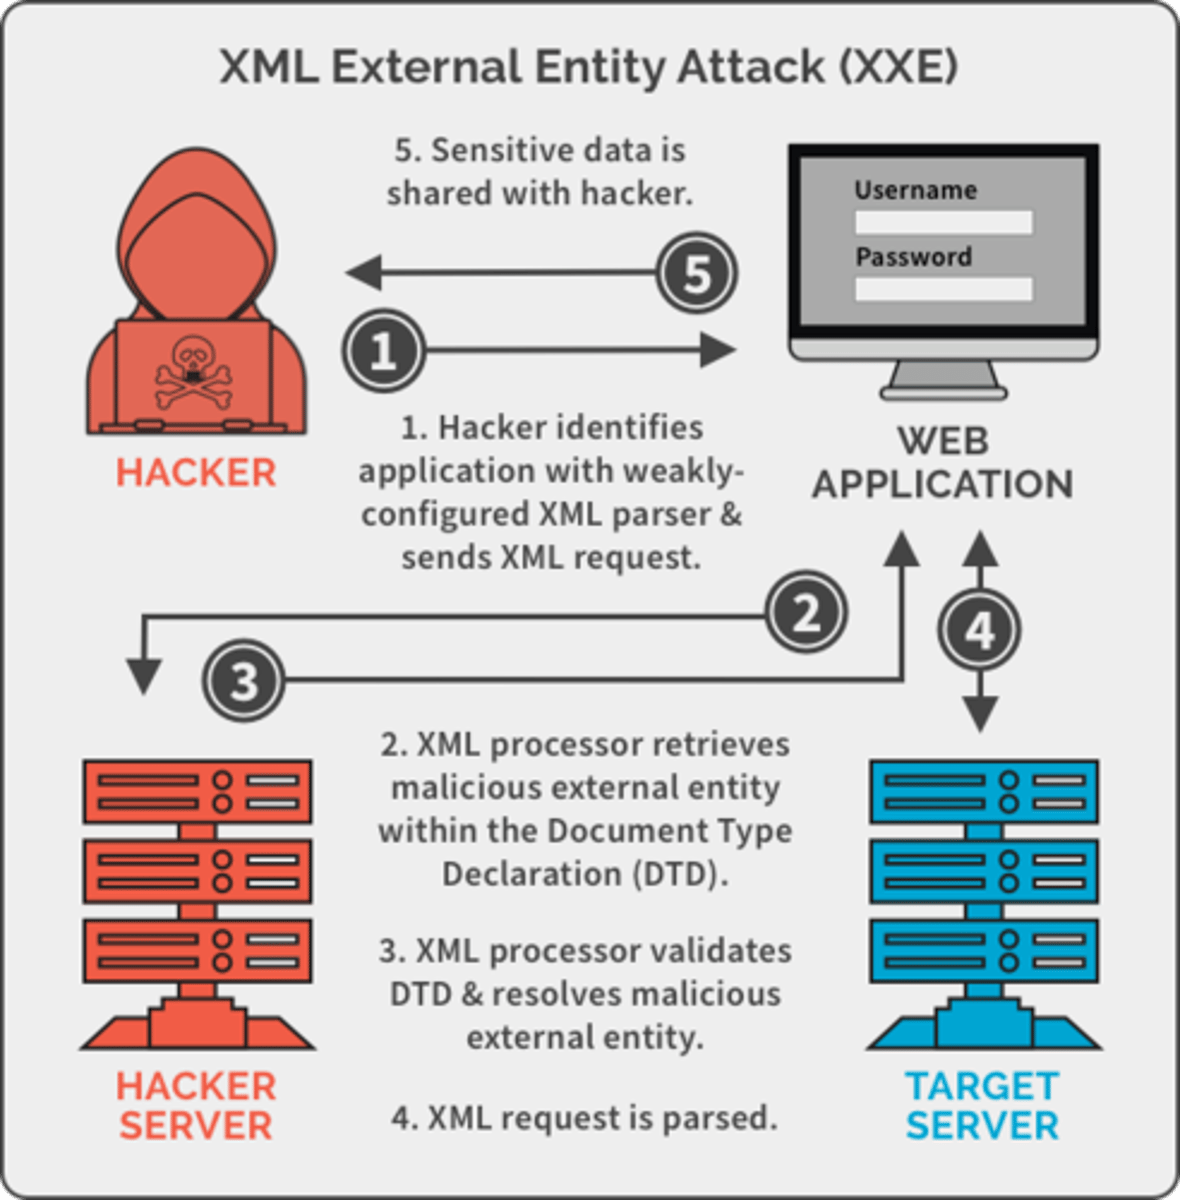 <p>exploit: a vulnerability that occurs when an web application processes XML input from an untrusted source without proper validation or mitigation measures.</p><p>- Attackers could gain access to files on a application server</p><p>- Perform DOS attacks</p><p>- Gain backdoor access to systems</p><p>- used to perform server-side request forgery (SSRF)</p><p>prevent:</p><p>- Replace XML with JSON or YAML</p><p>- patch and update</p><p>- perform security testing</p>